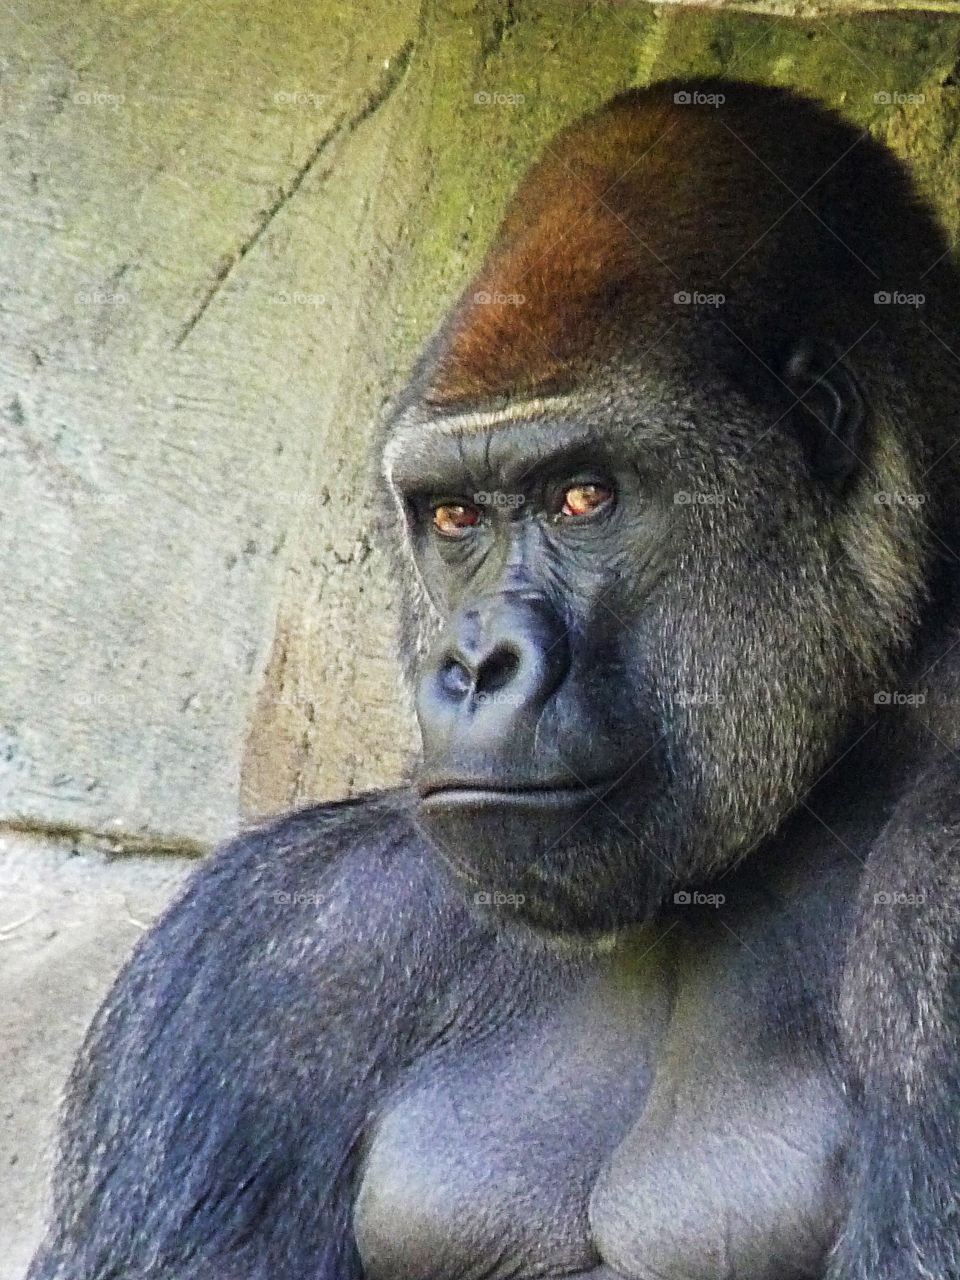 Gorilla with a serious expression.